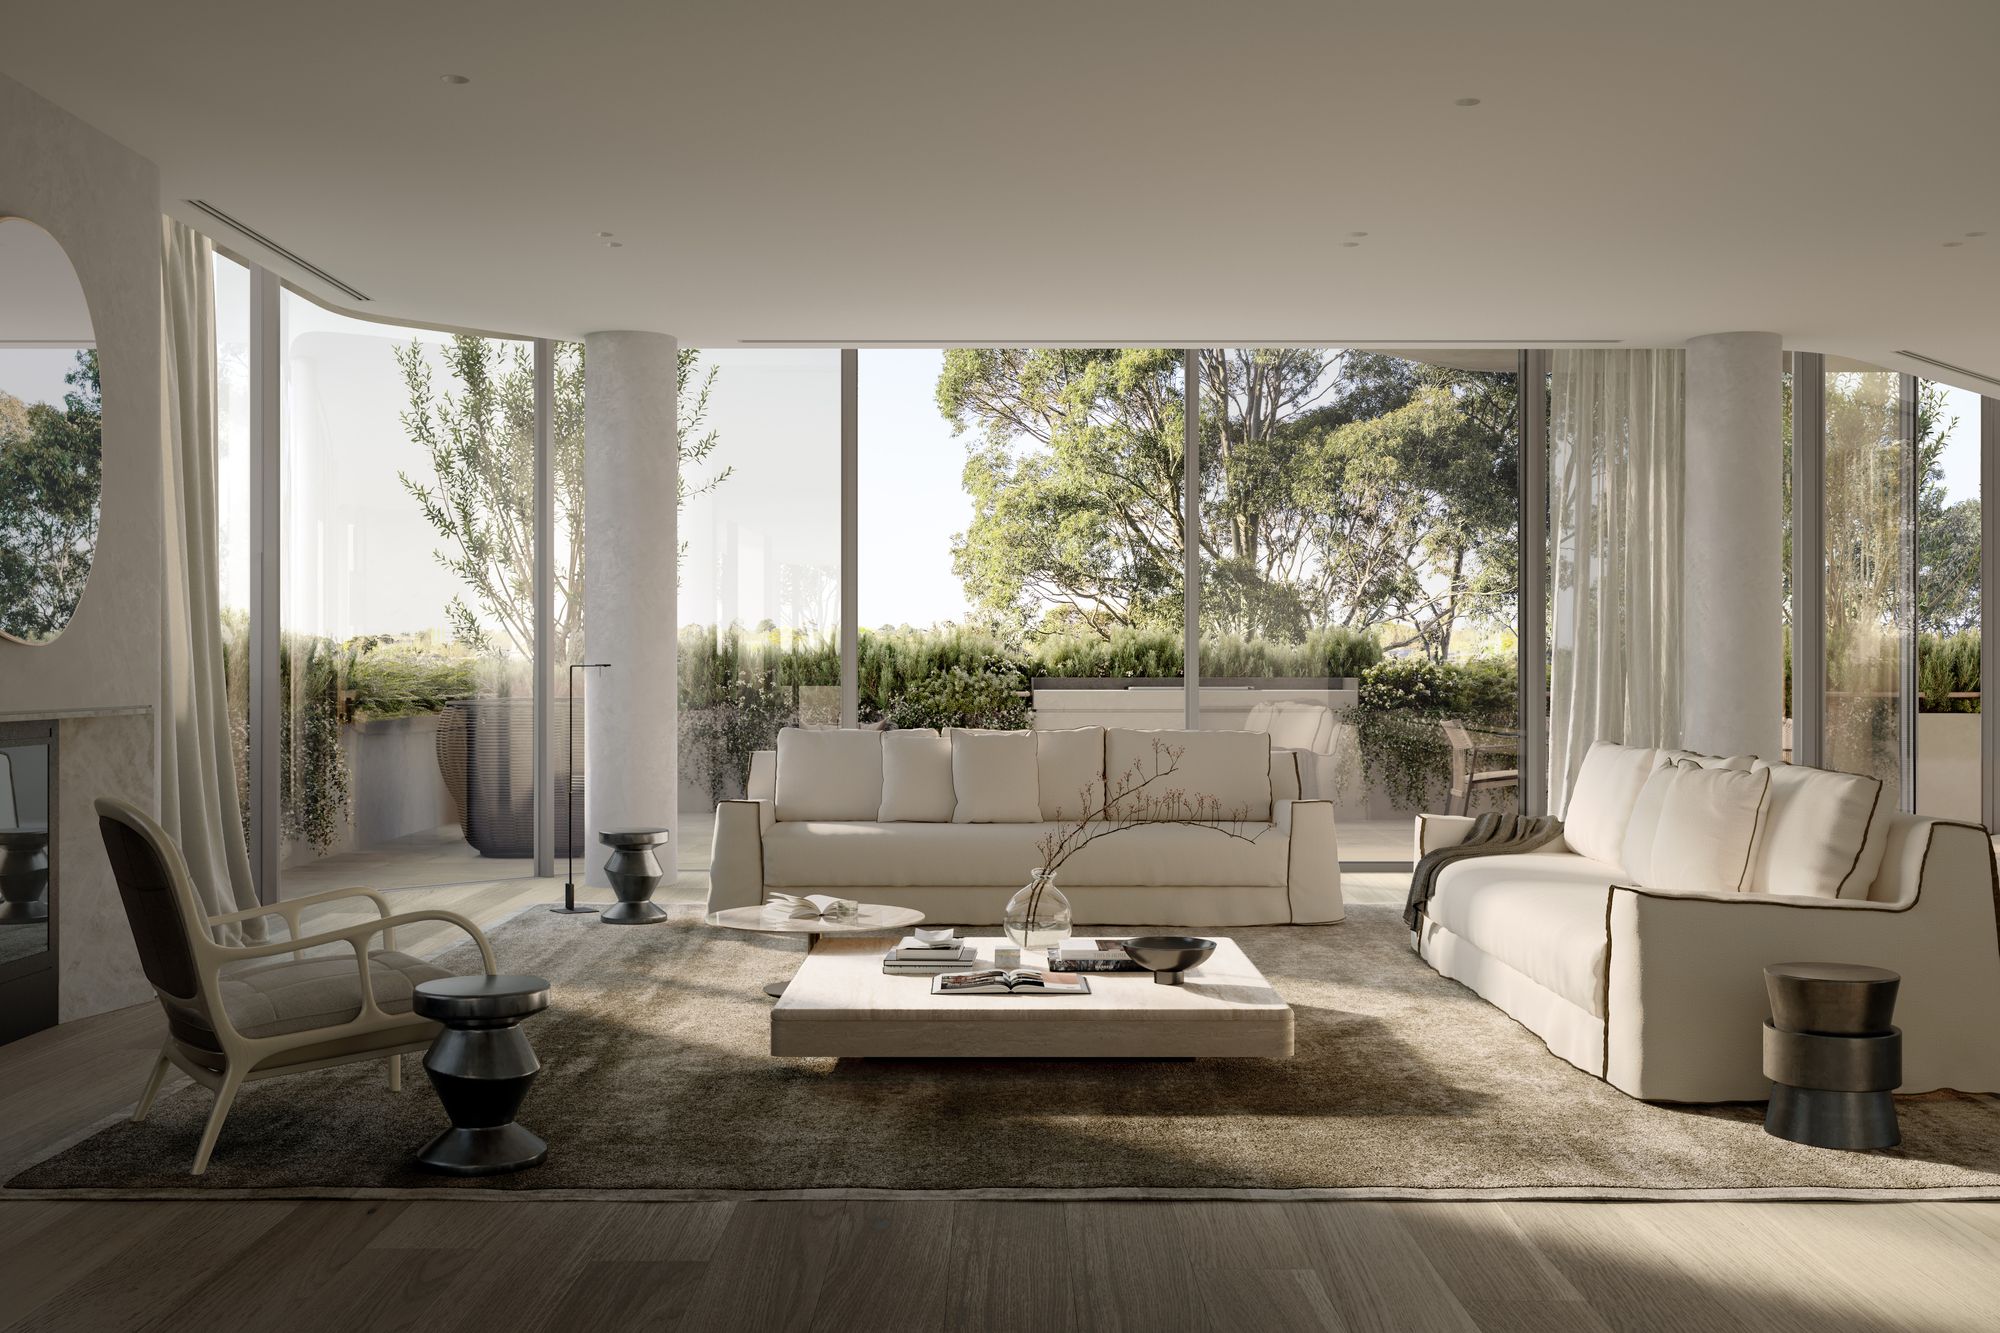 Como Toorak by Prime Edition x Jolson.This image showcases a modern, airy living space with abundant natural light flowing through expansive windows. Neutral-toned furniture, including a sleek sofa and distinctive armchair, is arranged on a large area rug, creating a cozy seating area. A low-profile coffee table sits at the center, adorned with minimalistic decor, while a unique floor lamp adds a contemporary touch. The room's design features clean lines and an open feel, connecting it to the outdoor patio and greenery beyond the glass, promoting indoor-outdoor living.